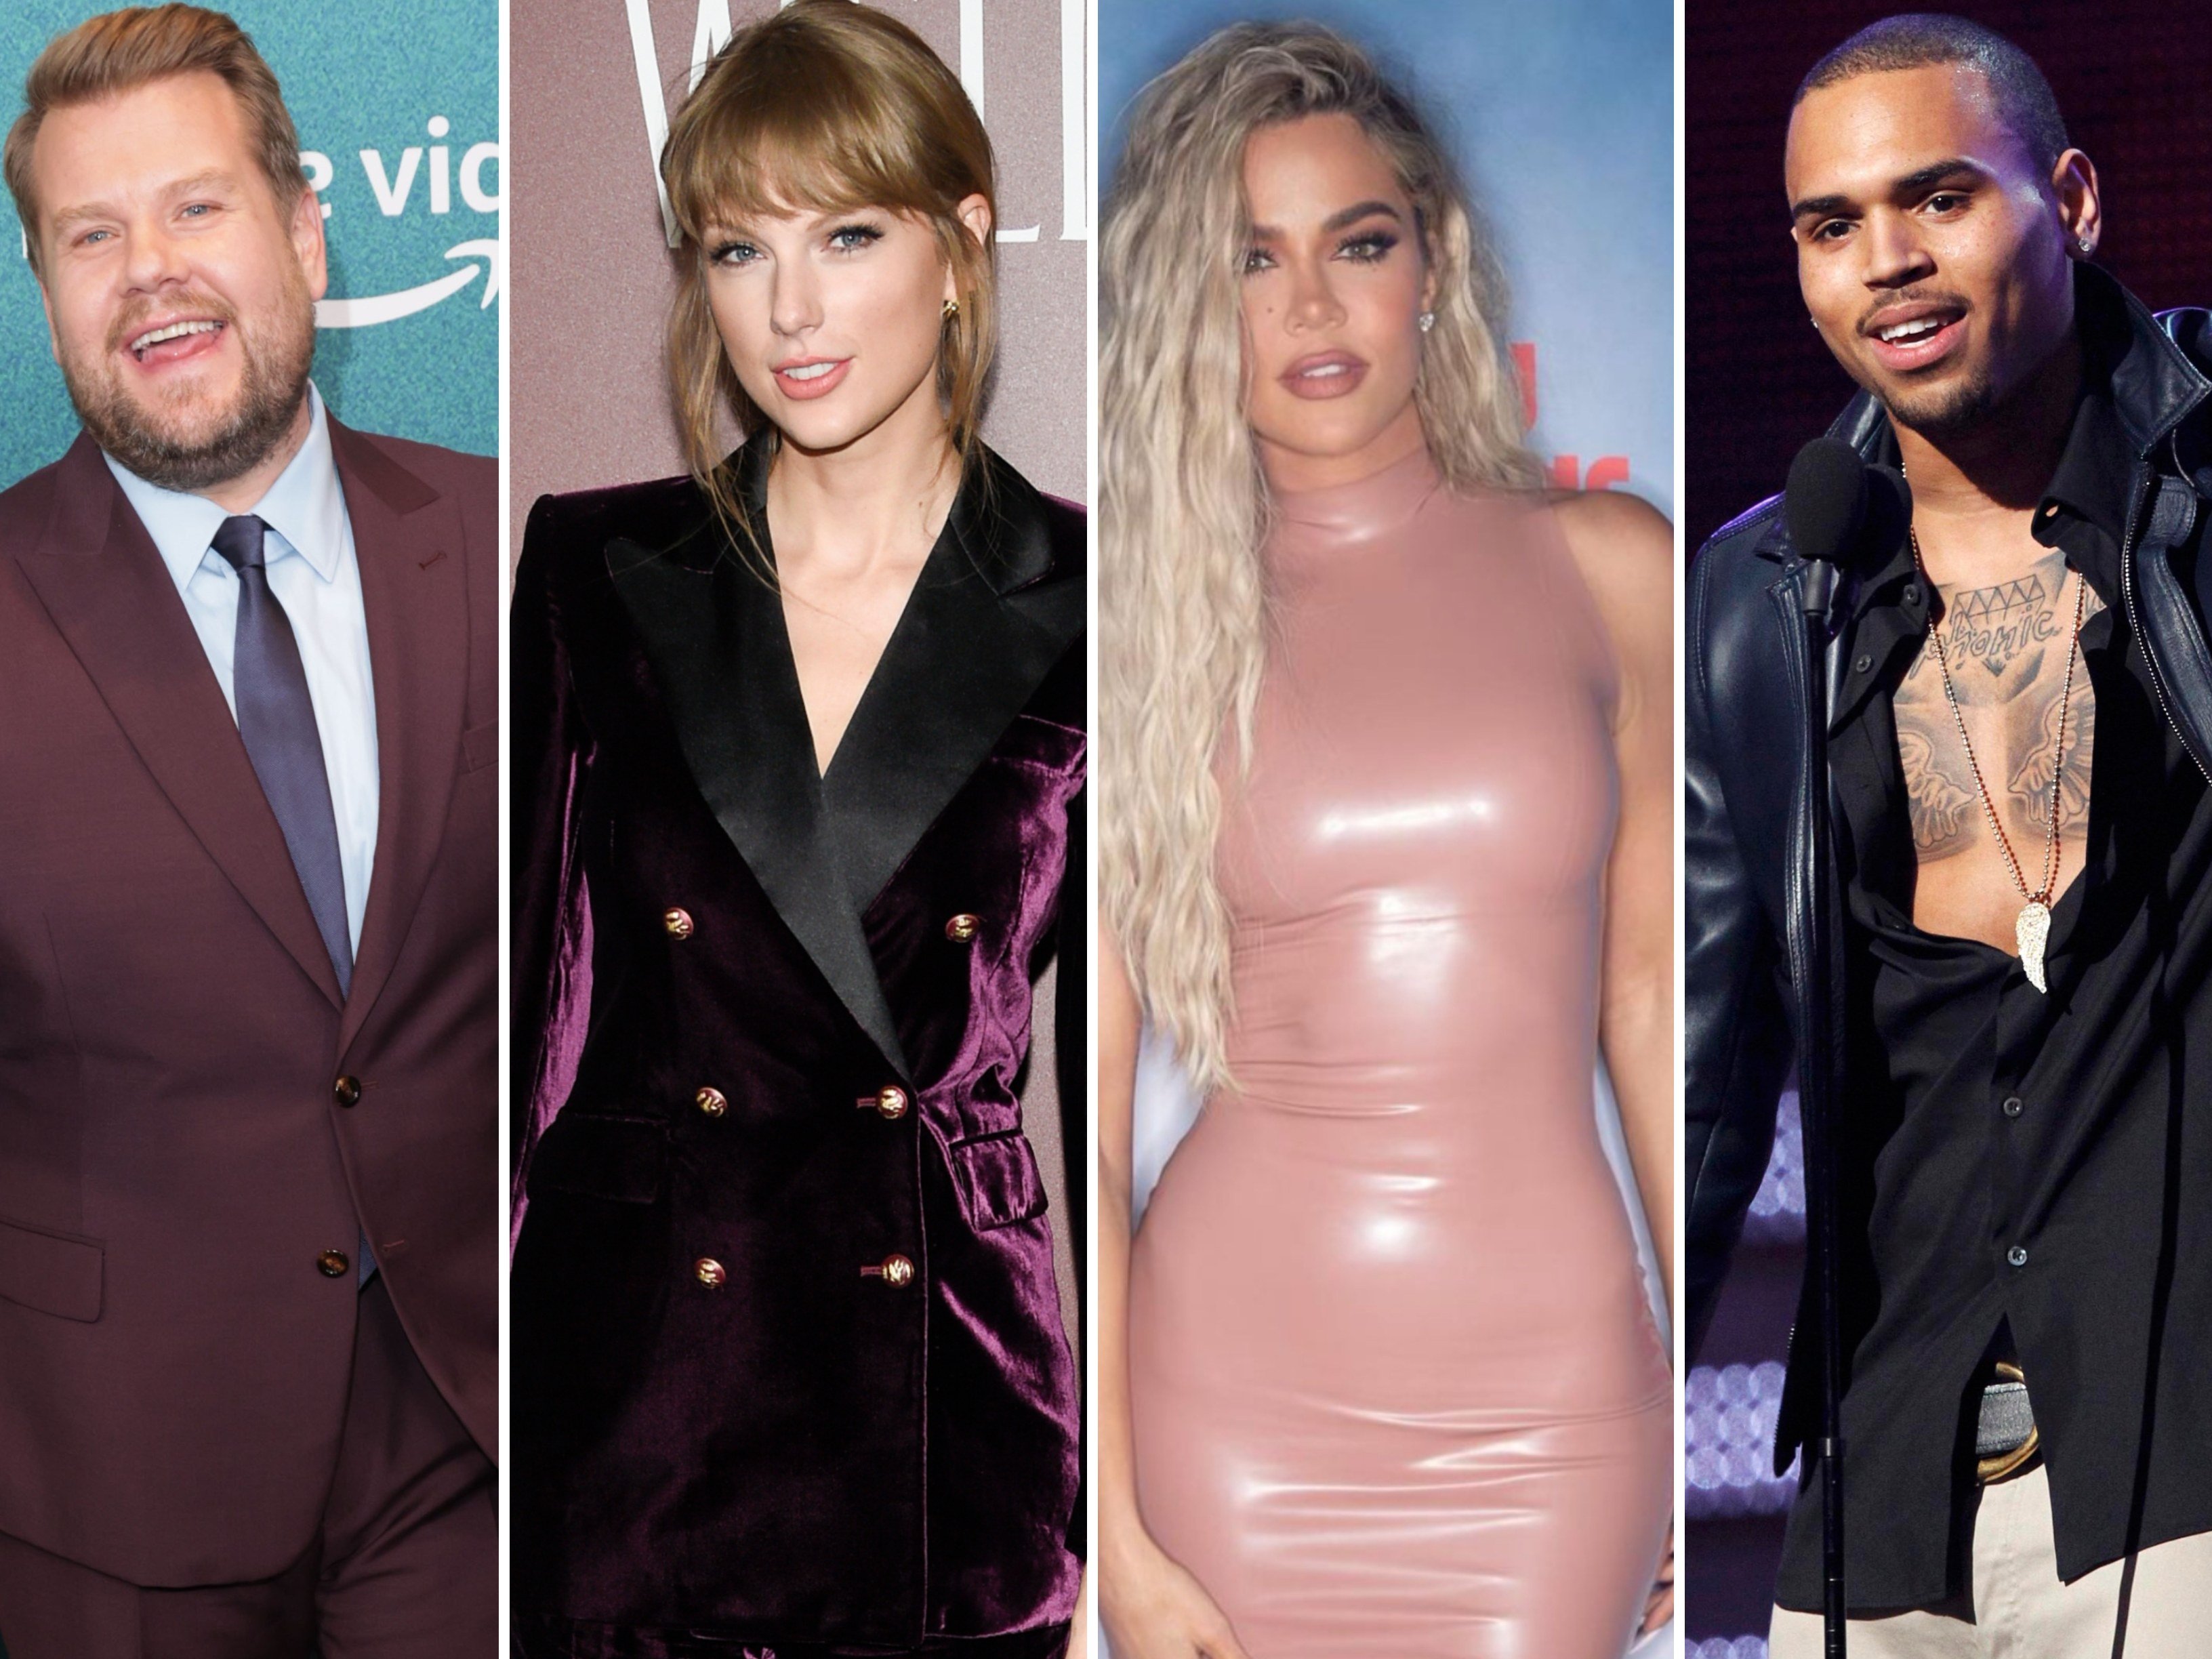 James Corden, Taylor Swift, Khloé Kardashian
and Chris Brown have all been accused of plagiarism. Photos: AFP, AP, @khloekardashian/Instagram, Reuters